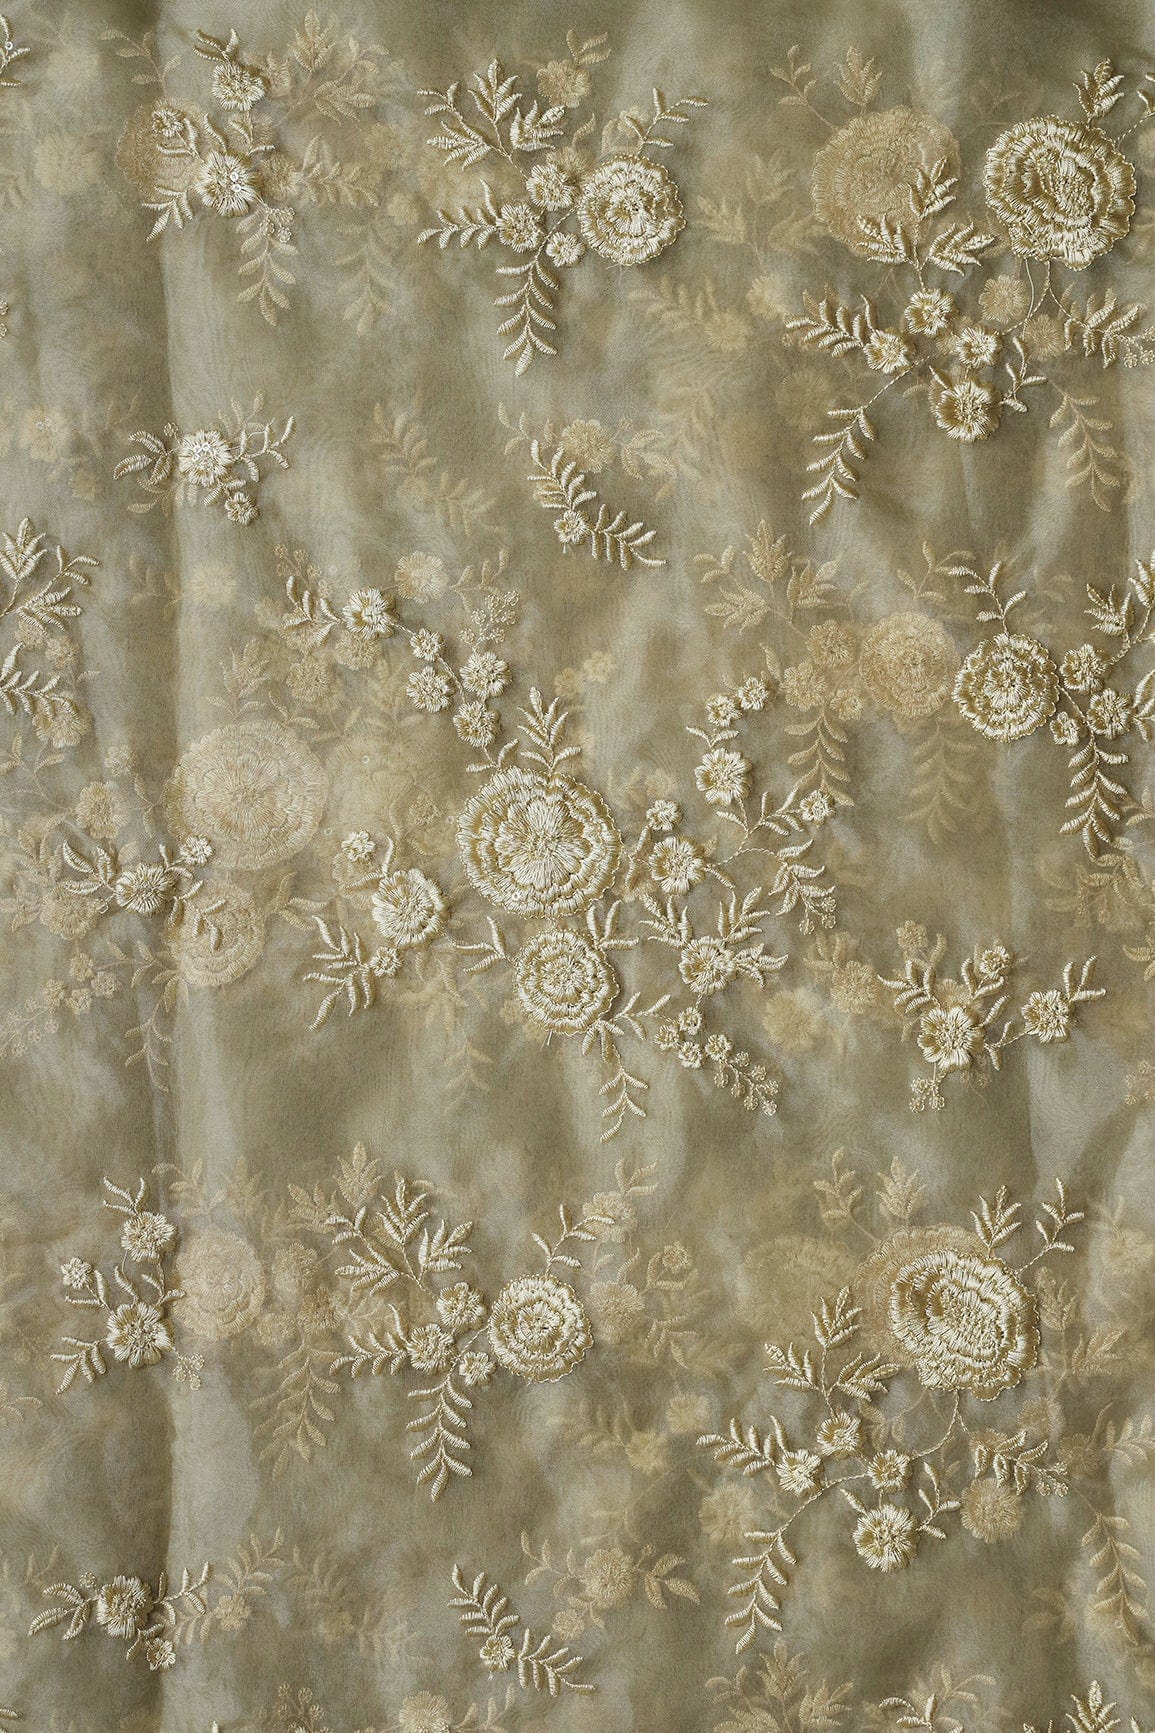 Beige Thread With Water Sequins Floral Embroidery Work On Beige Organza Fabric - doeraa